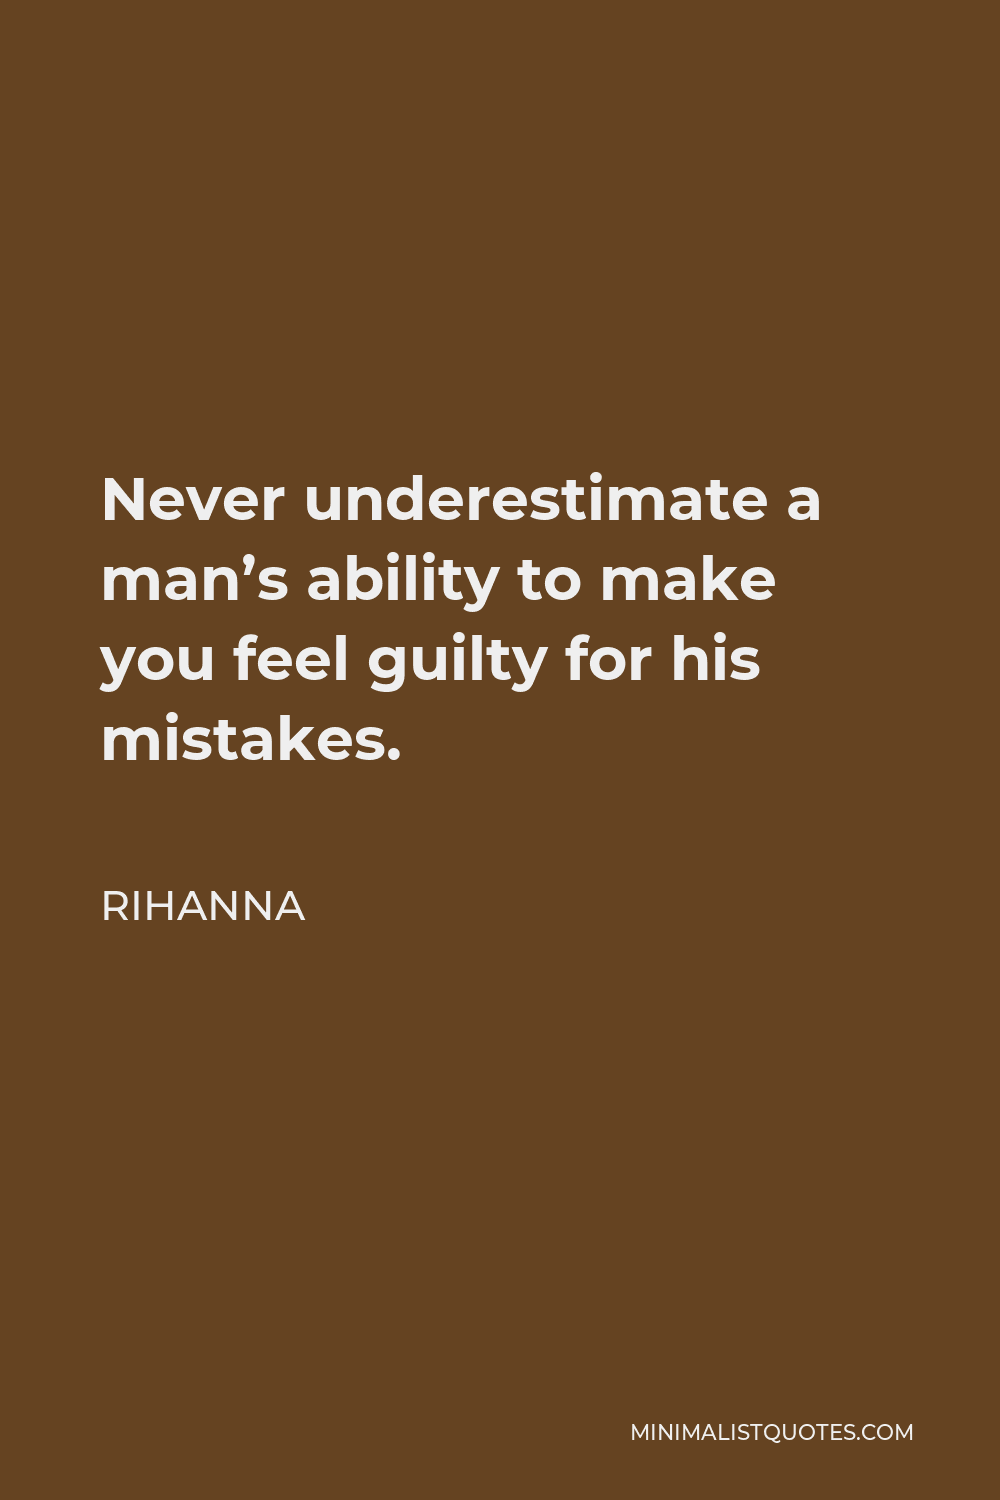 Rihanna Quote - Never underestimate a man’s ability to make you feel guilty for his mistakes.